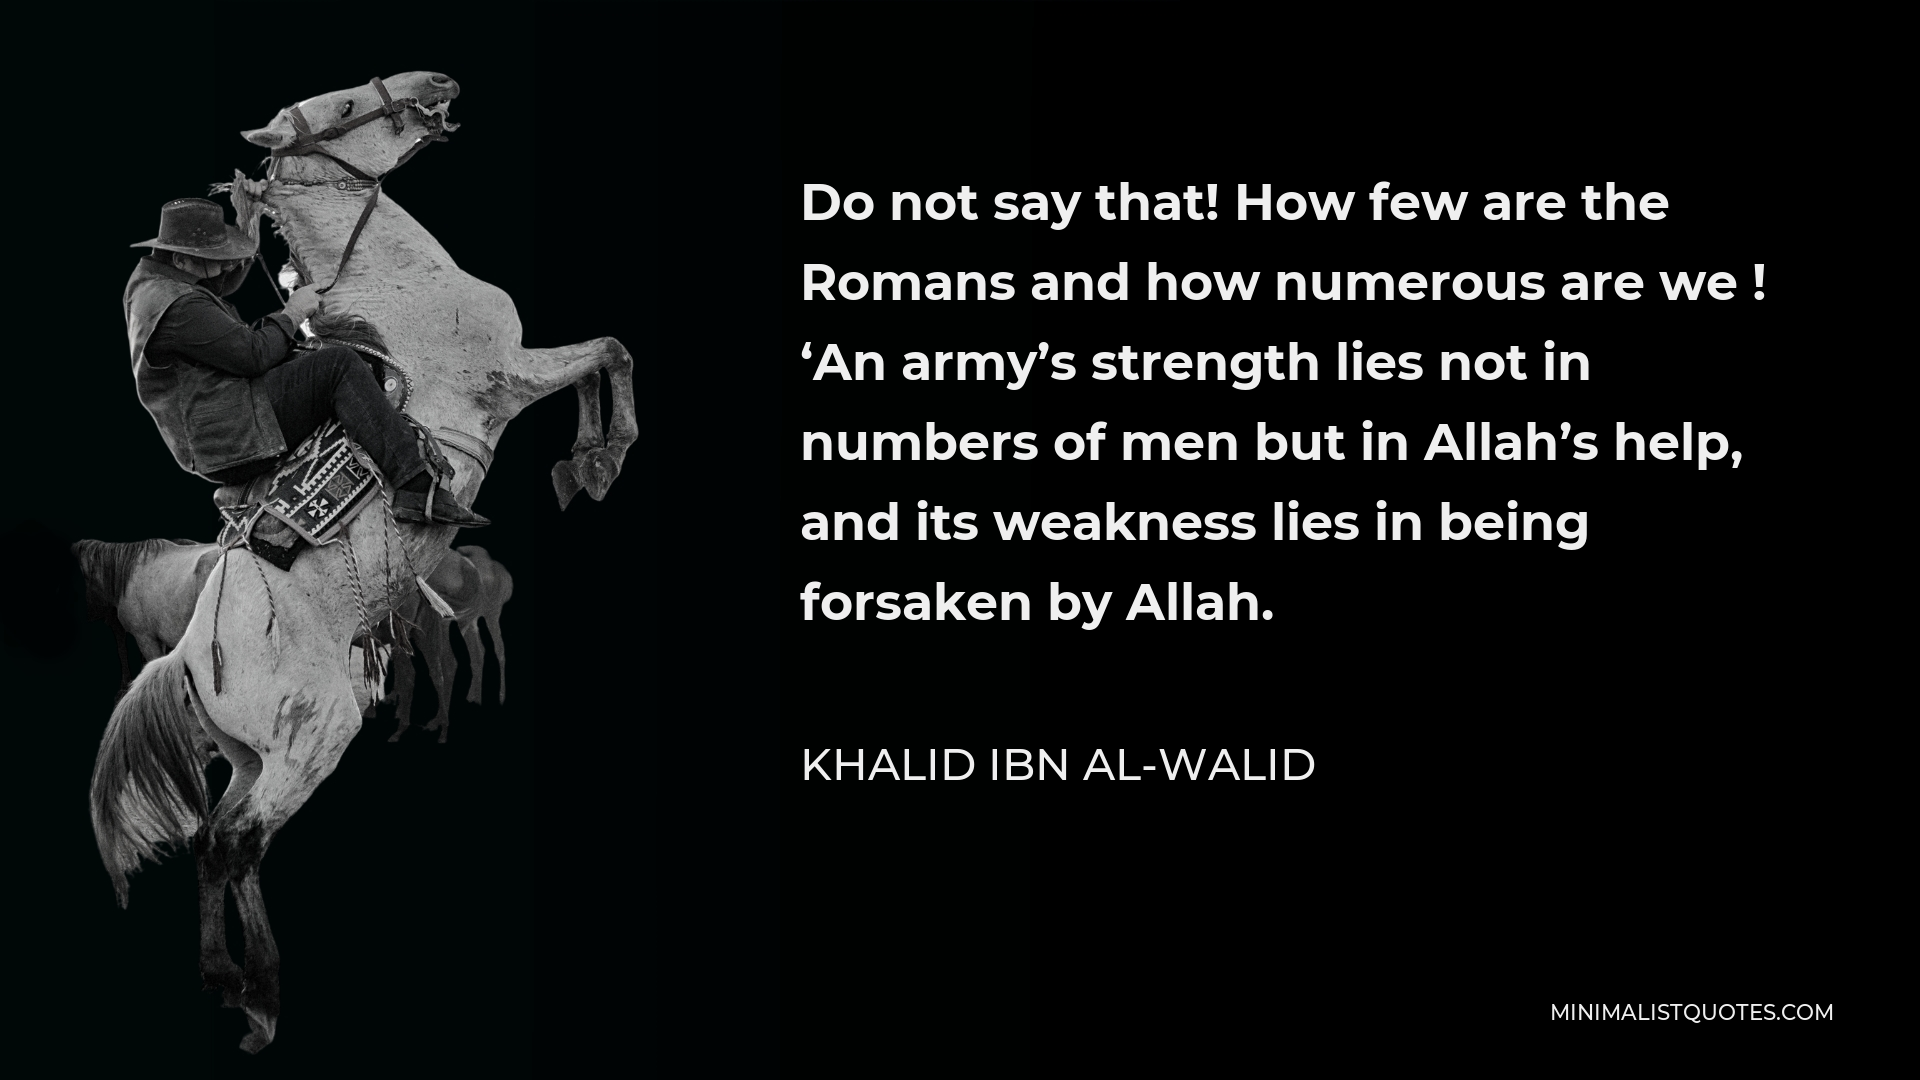 Khalid ibn al-Walid Quote - Do not say that! How few are the Romans and how numerous are we ! ‘An army’s strength lies not in numbers of men but in Allah’s help, and its weakness lies in being forsaken by Allah.